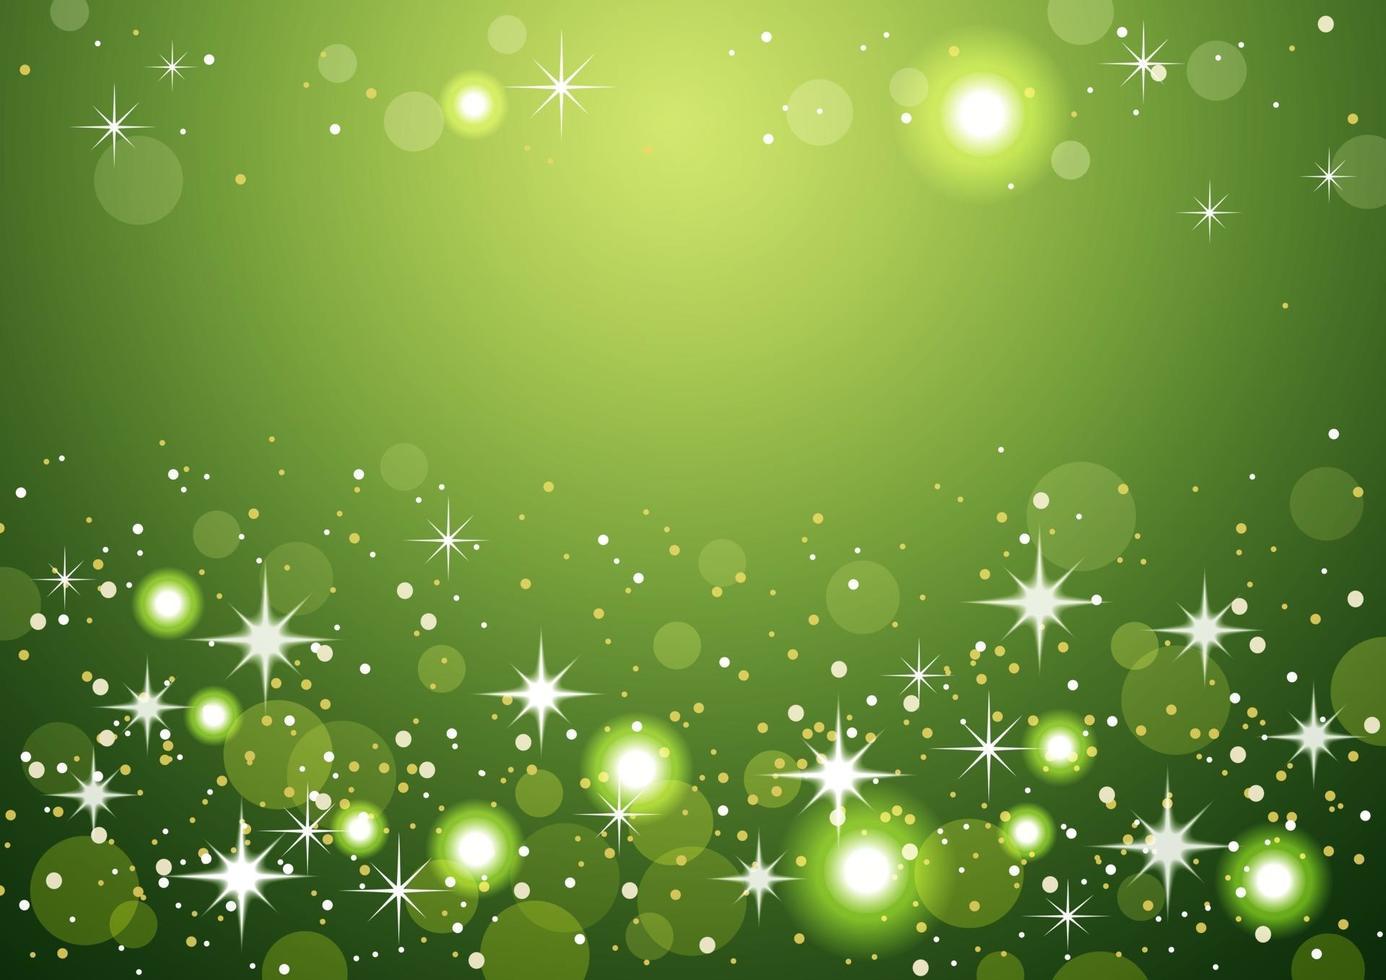 Green Abstract Bokeh Background. Christmas And New Year Holidays Vector Illustration.